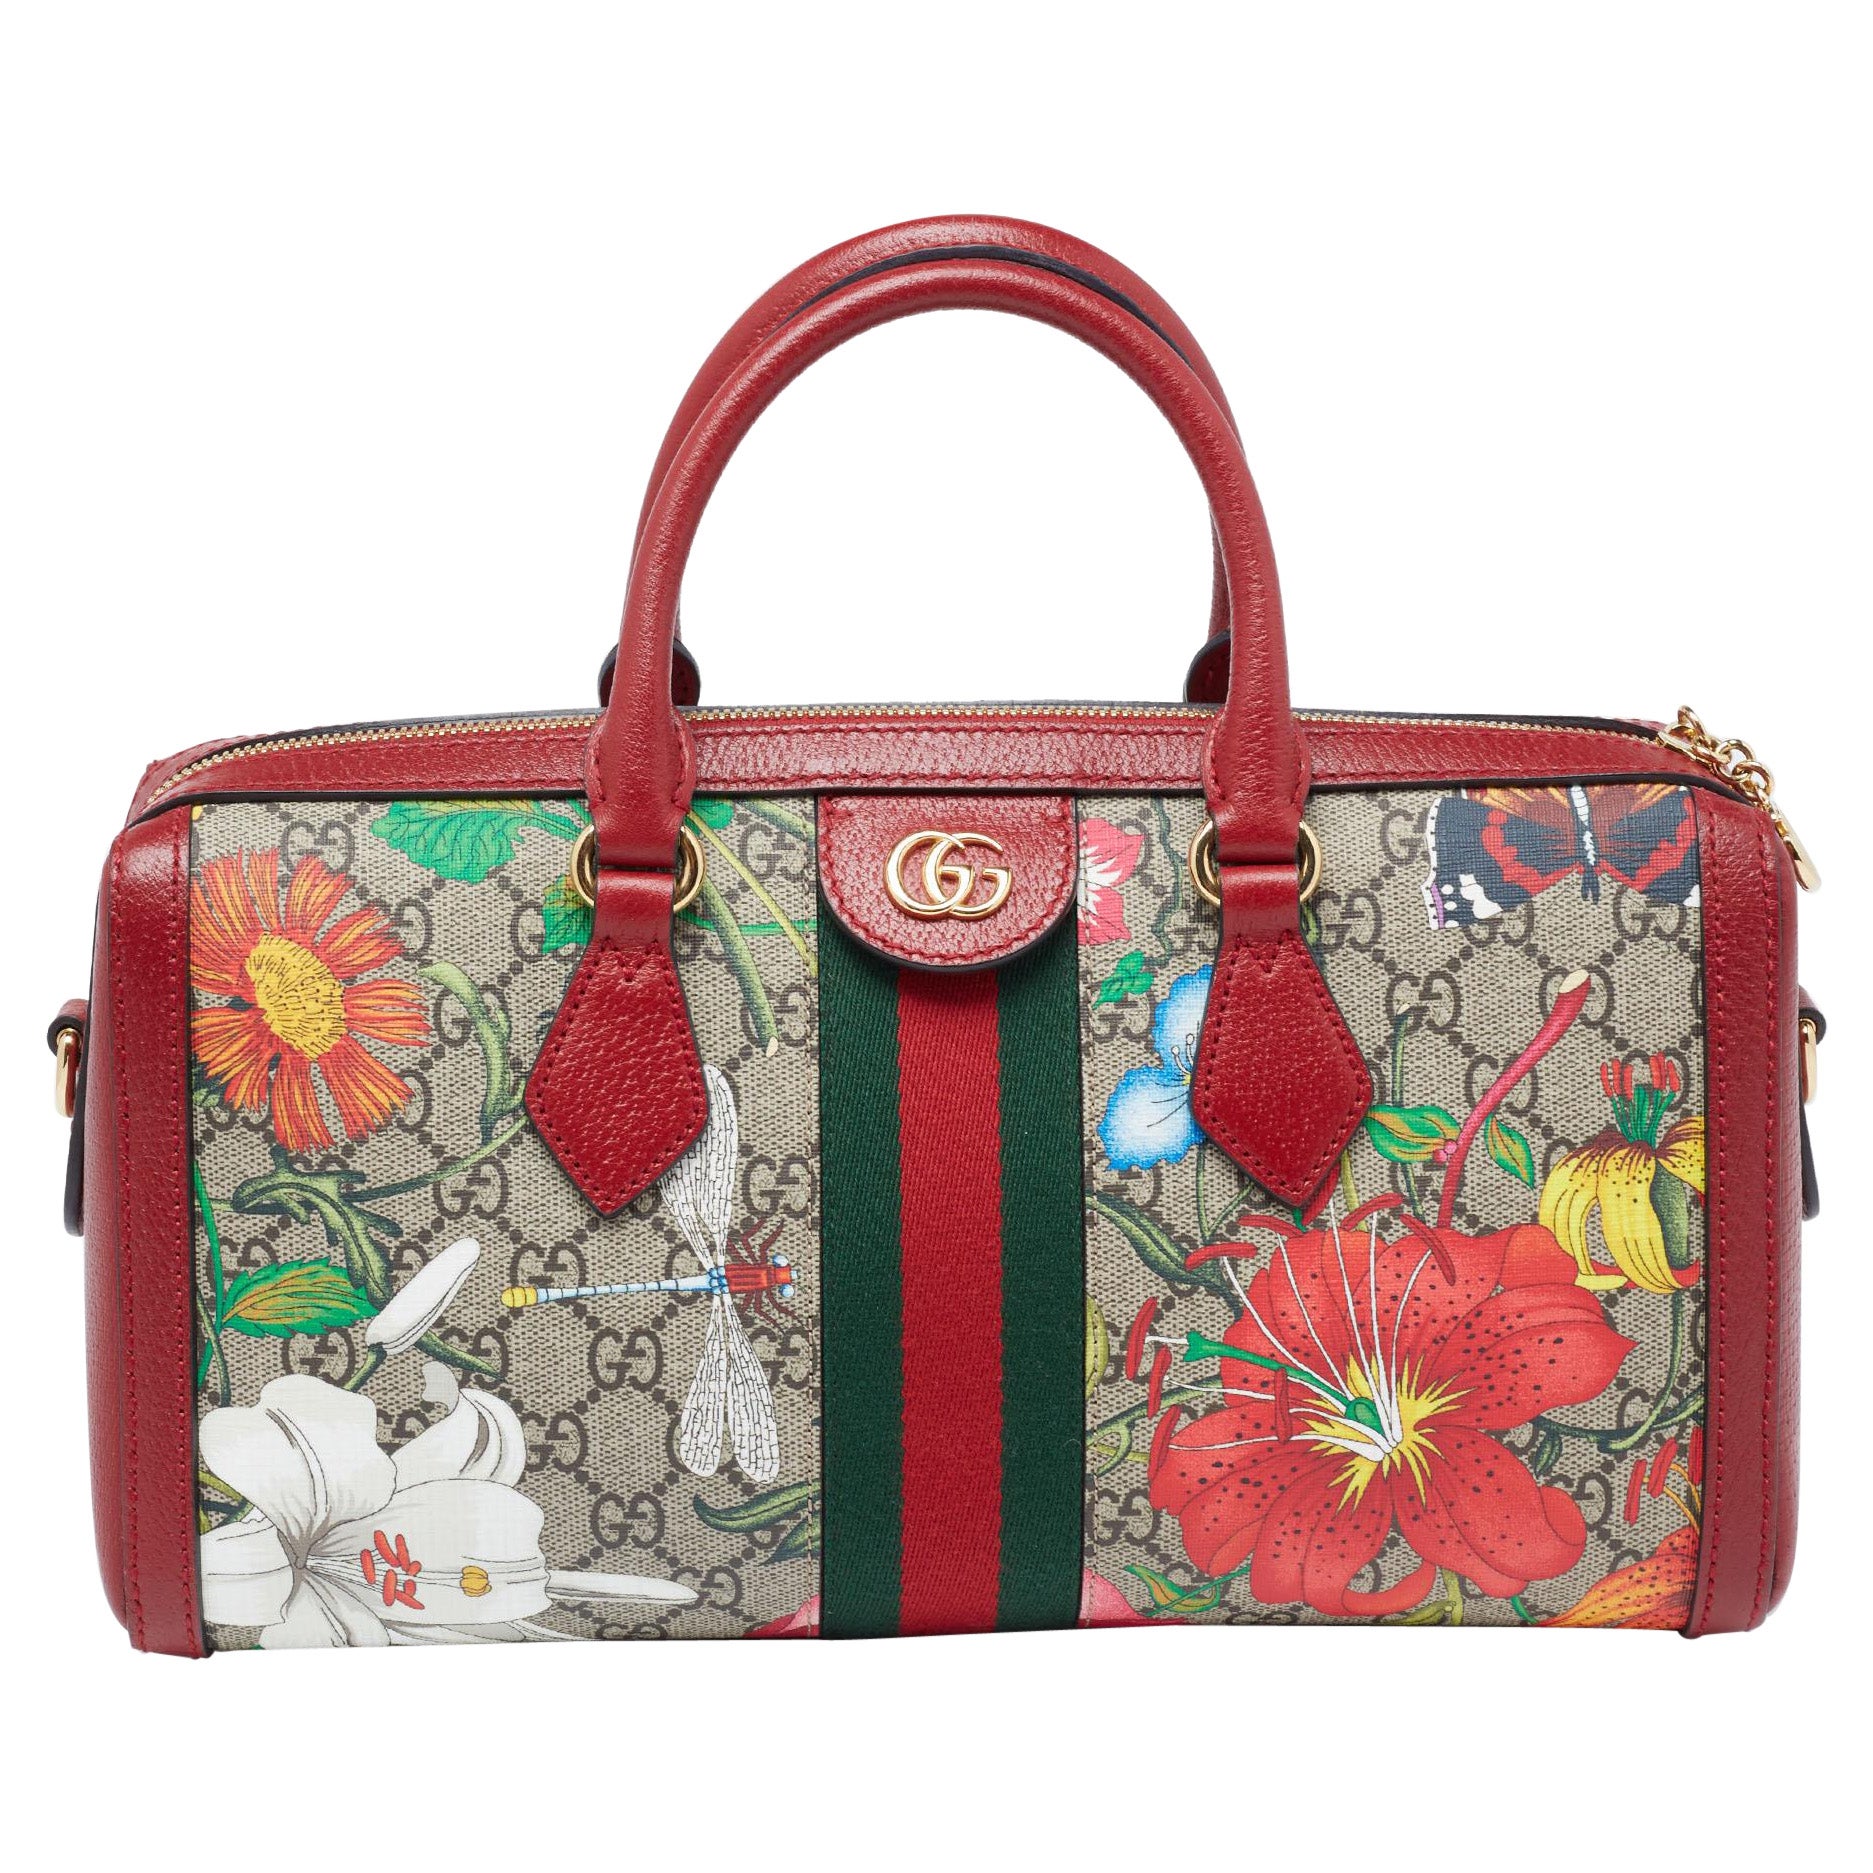 Gucci Red/Beige GG Supreme Flora Canvas and Leather Medium Ophidia Boston Bag